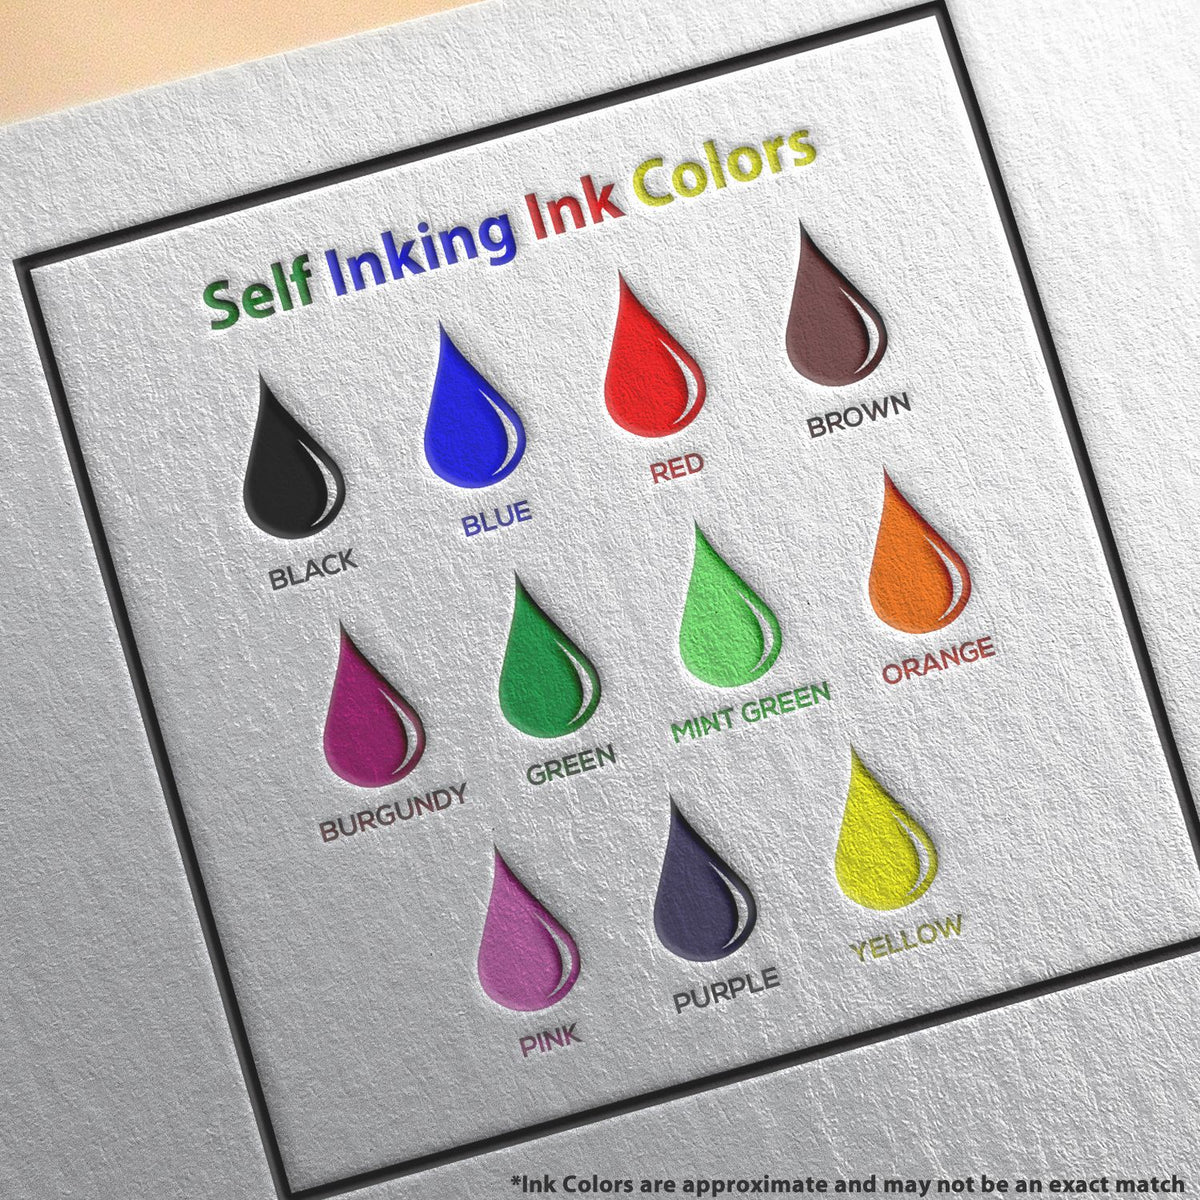 A picture showing the different ink colors or hues available for the Self-Inking Florida Landscape Architect Stamp product.